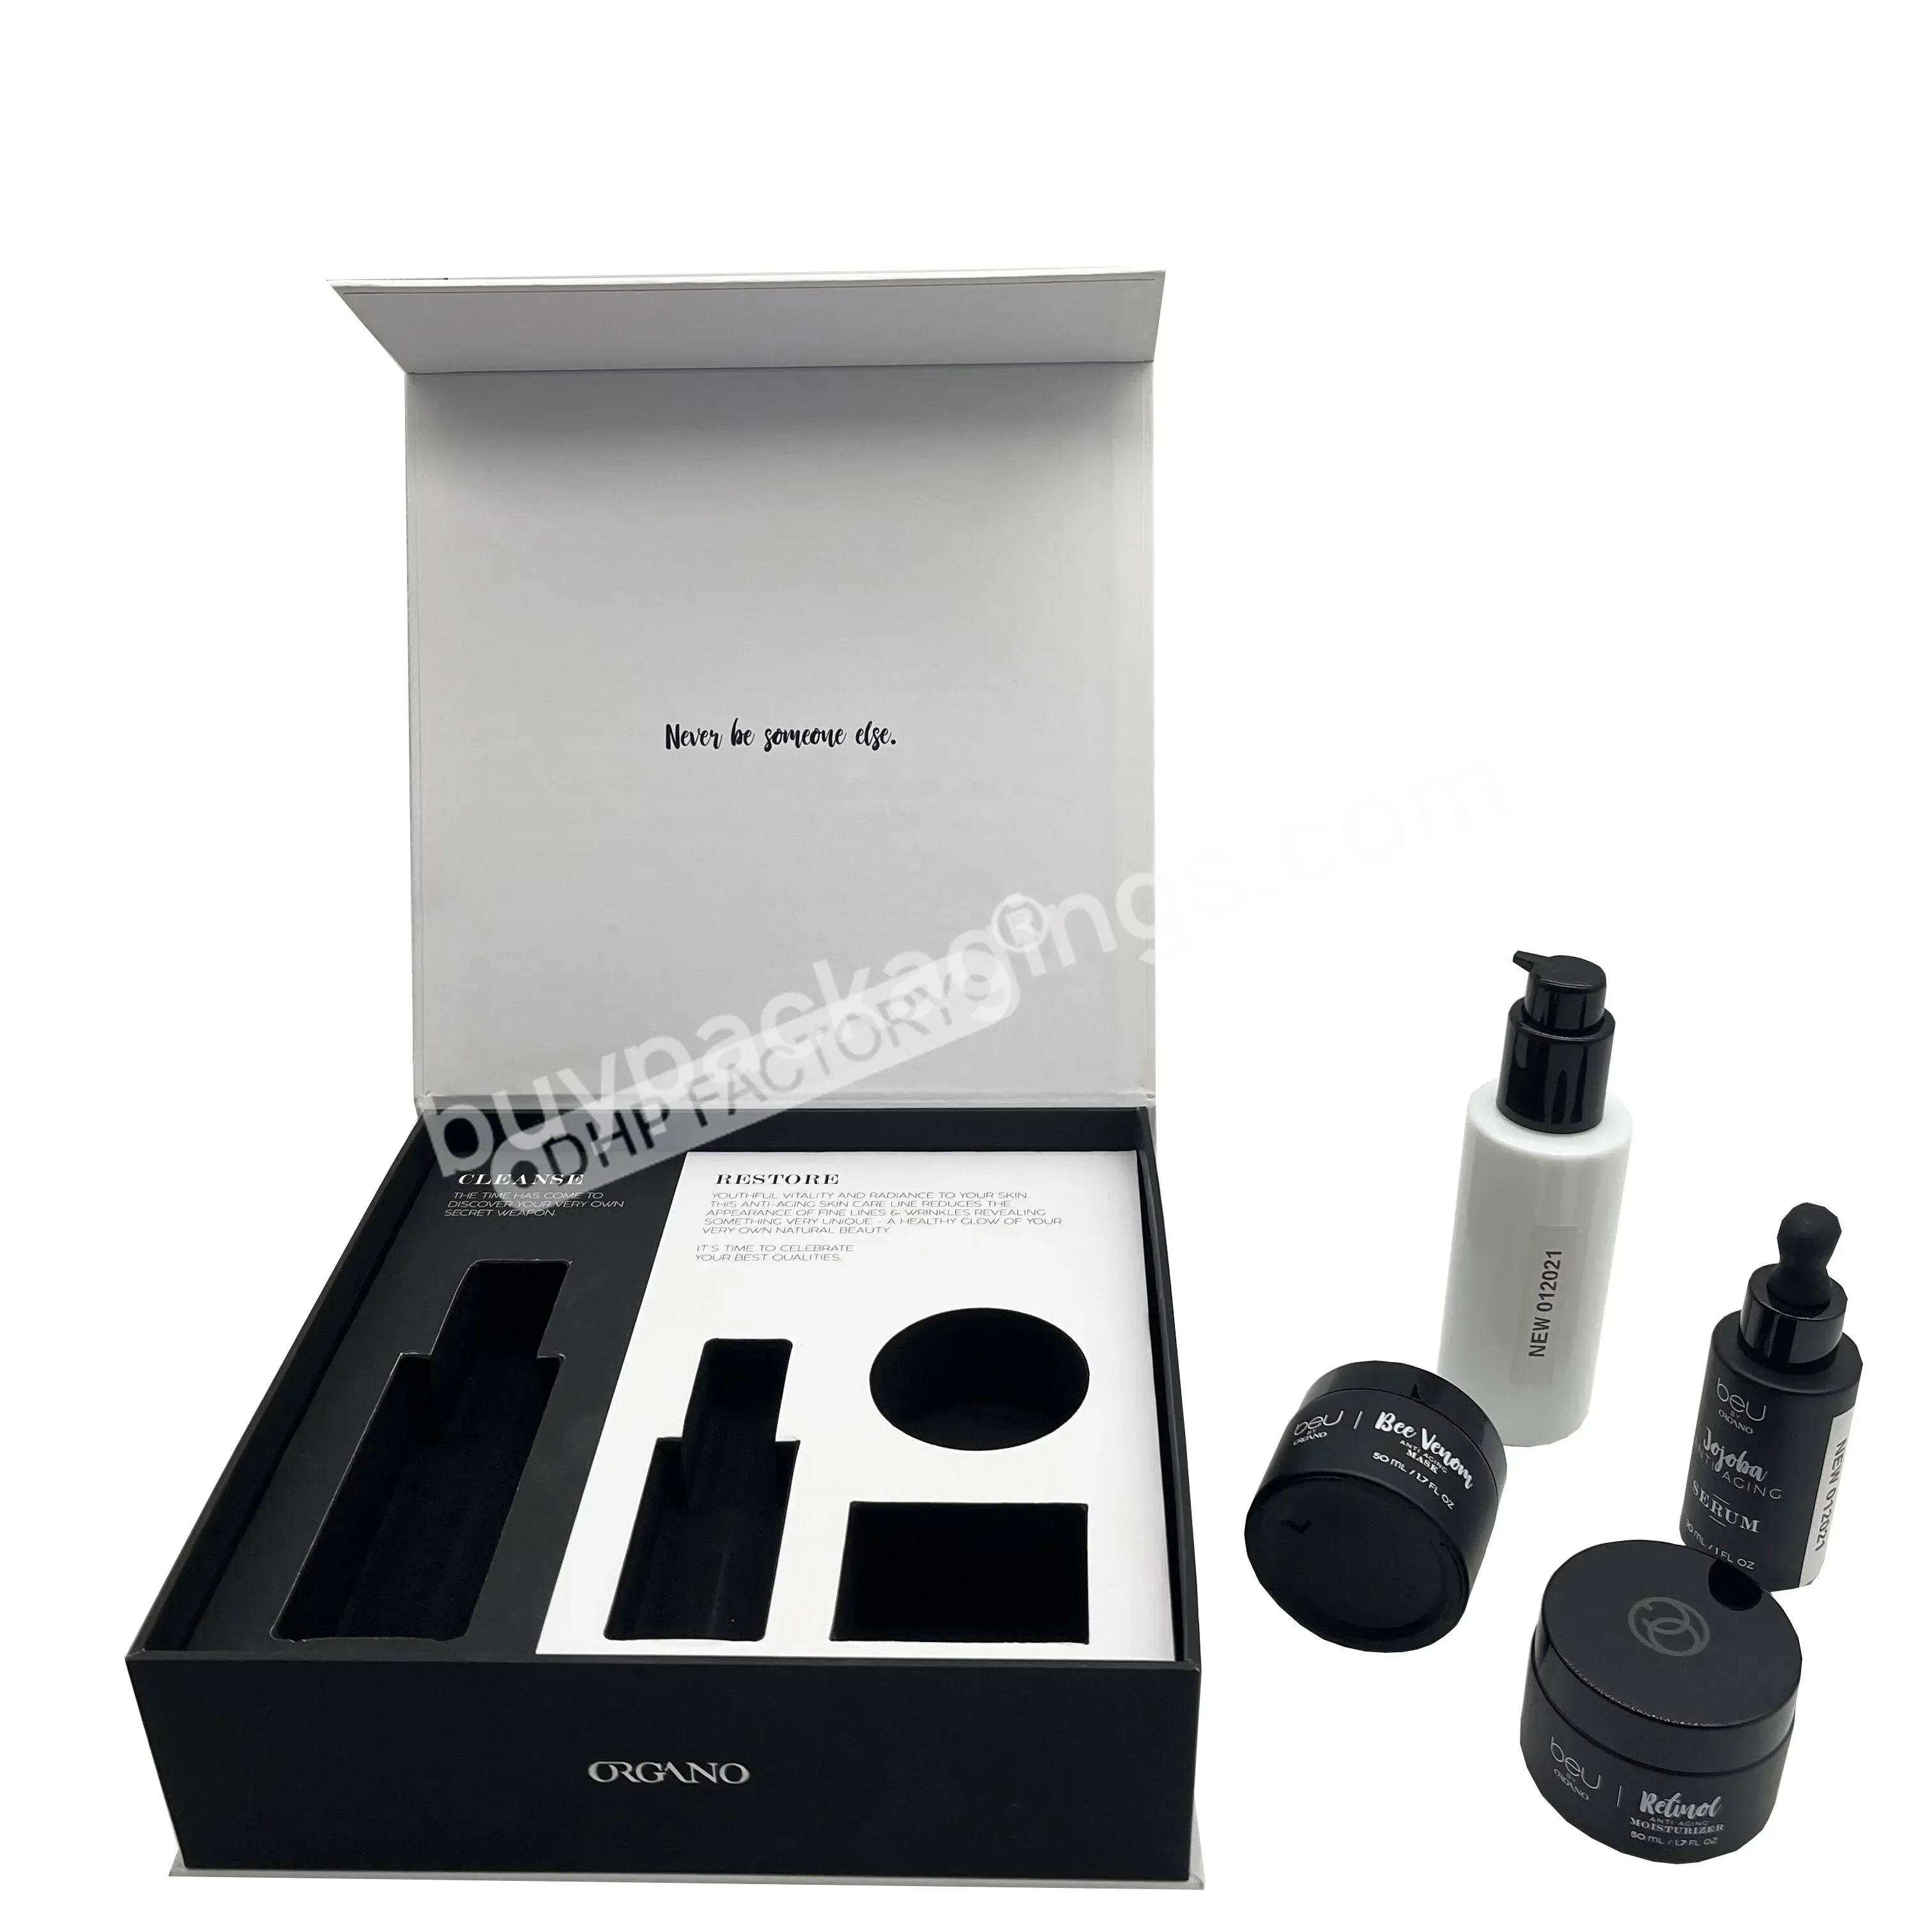 Elegant Custom Printing Black Soft Touch Lamination Cosmetic Skin Care Bottle Magnetic Closure Gift Boxes With Eva Foam Insert